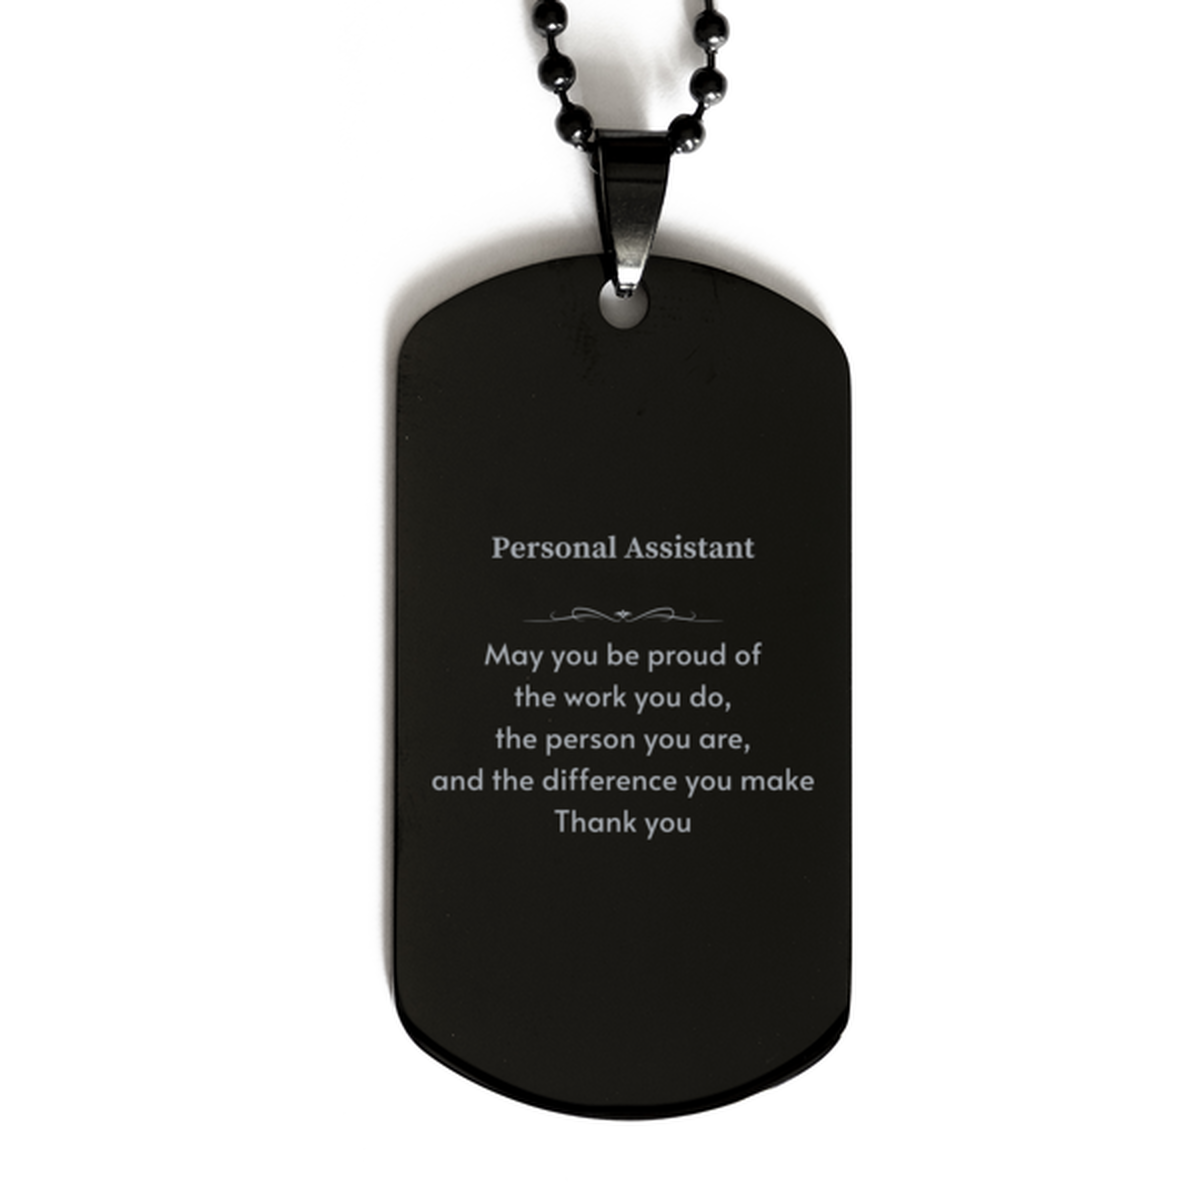 Heartwarming Black Dog Tag Retirement Coworkers Gifts for Personal Assistant, Personal Assistant May You be proud of the work you do, the person you are Gifts for Boss Men Women Friends